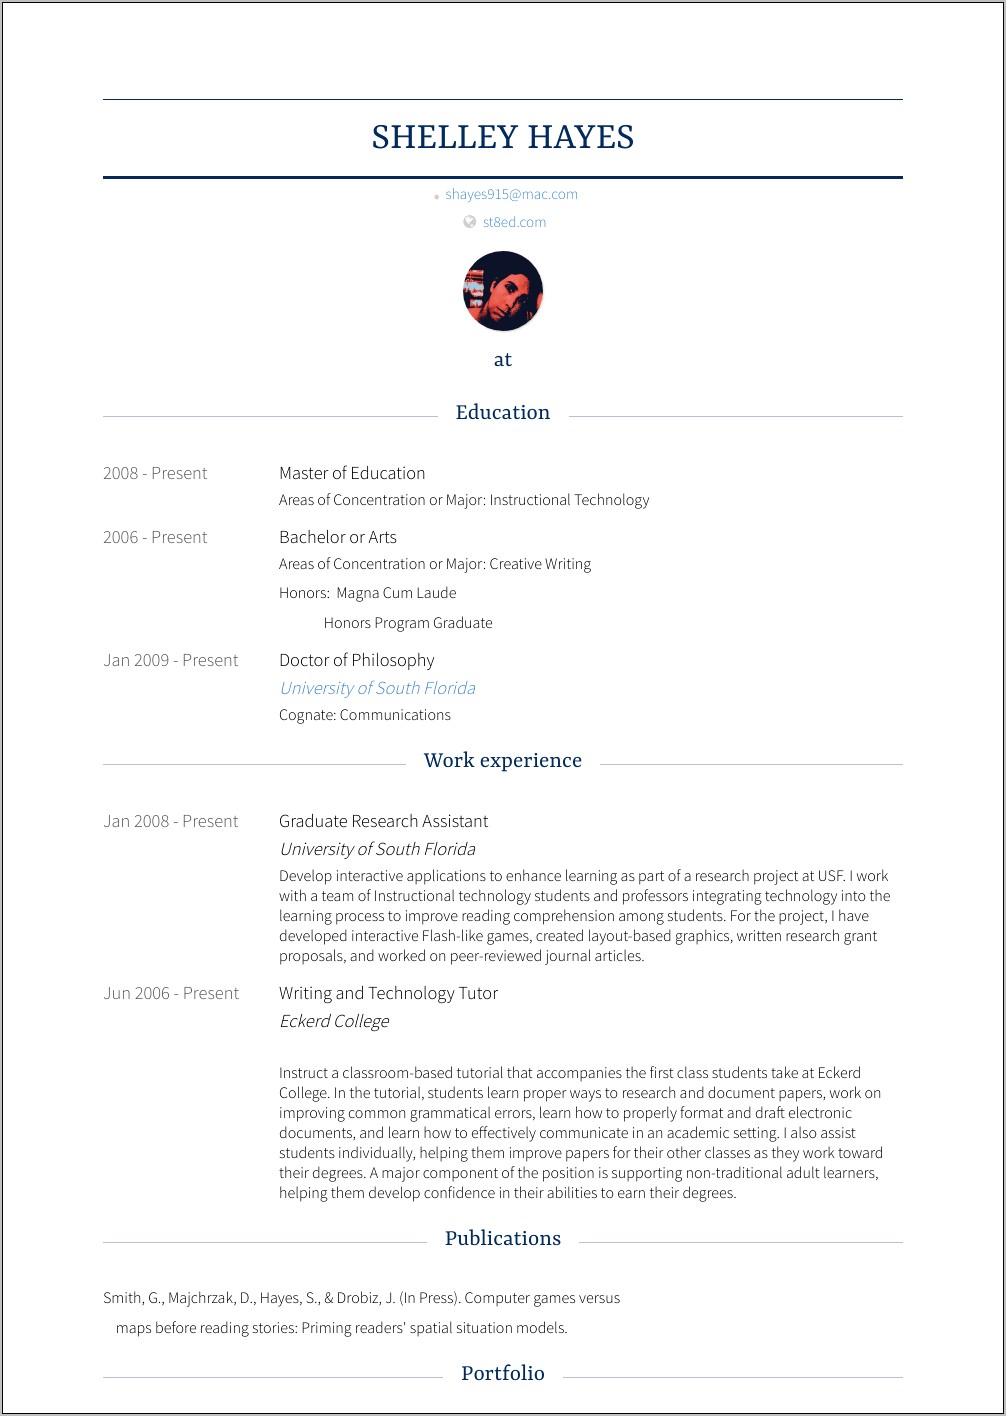 Sample Resume For Graduate Research Assistant